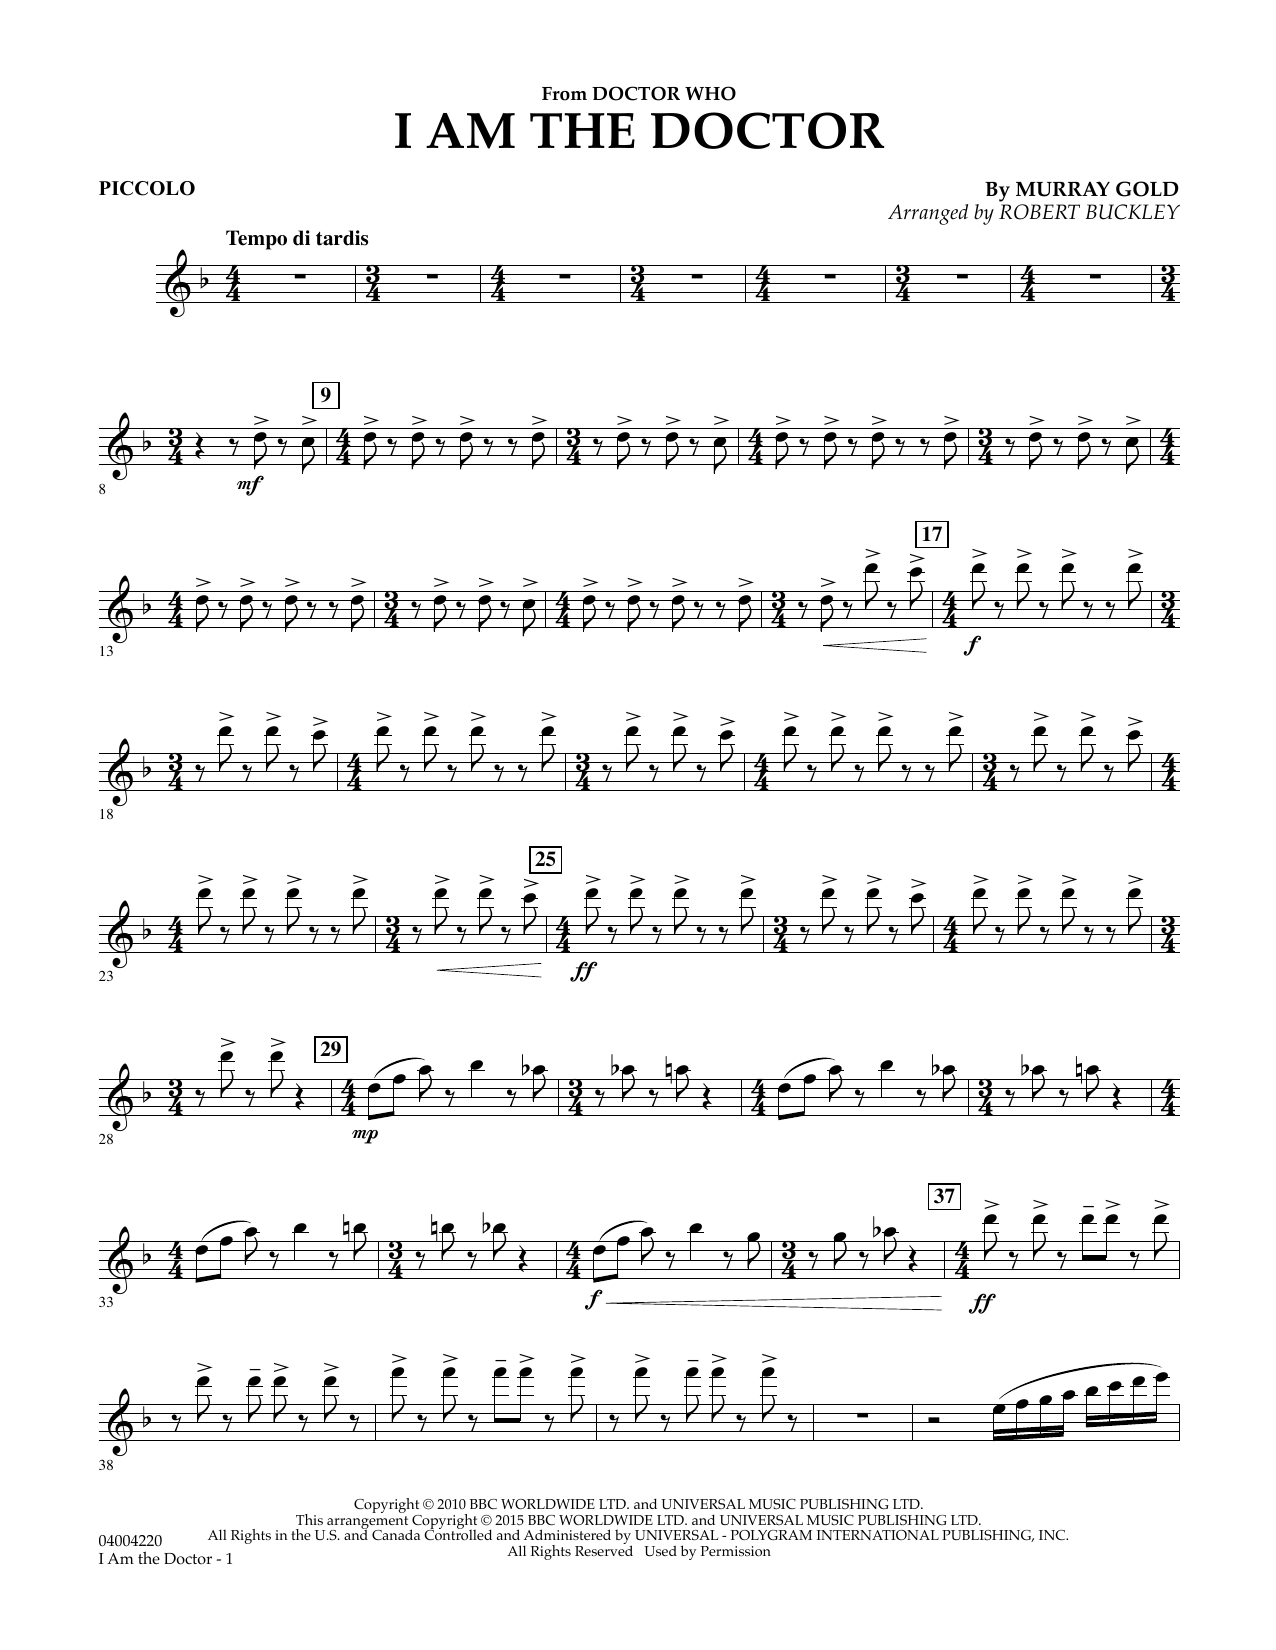 Robert Buckley I Am the Doctor (from Doctor Who) - Piccolo sheet music notes and chords. Download Printable PDF.